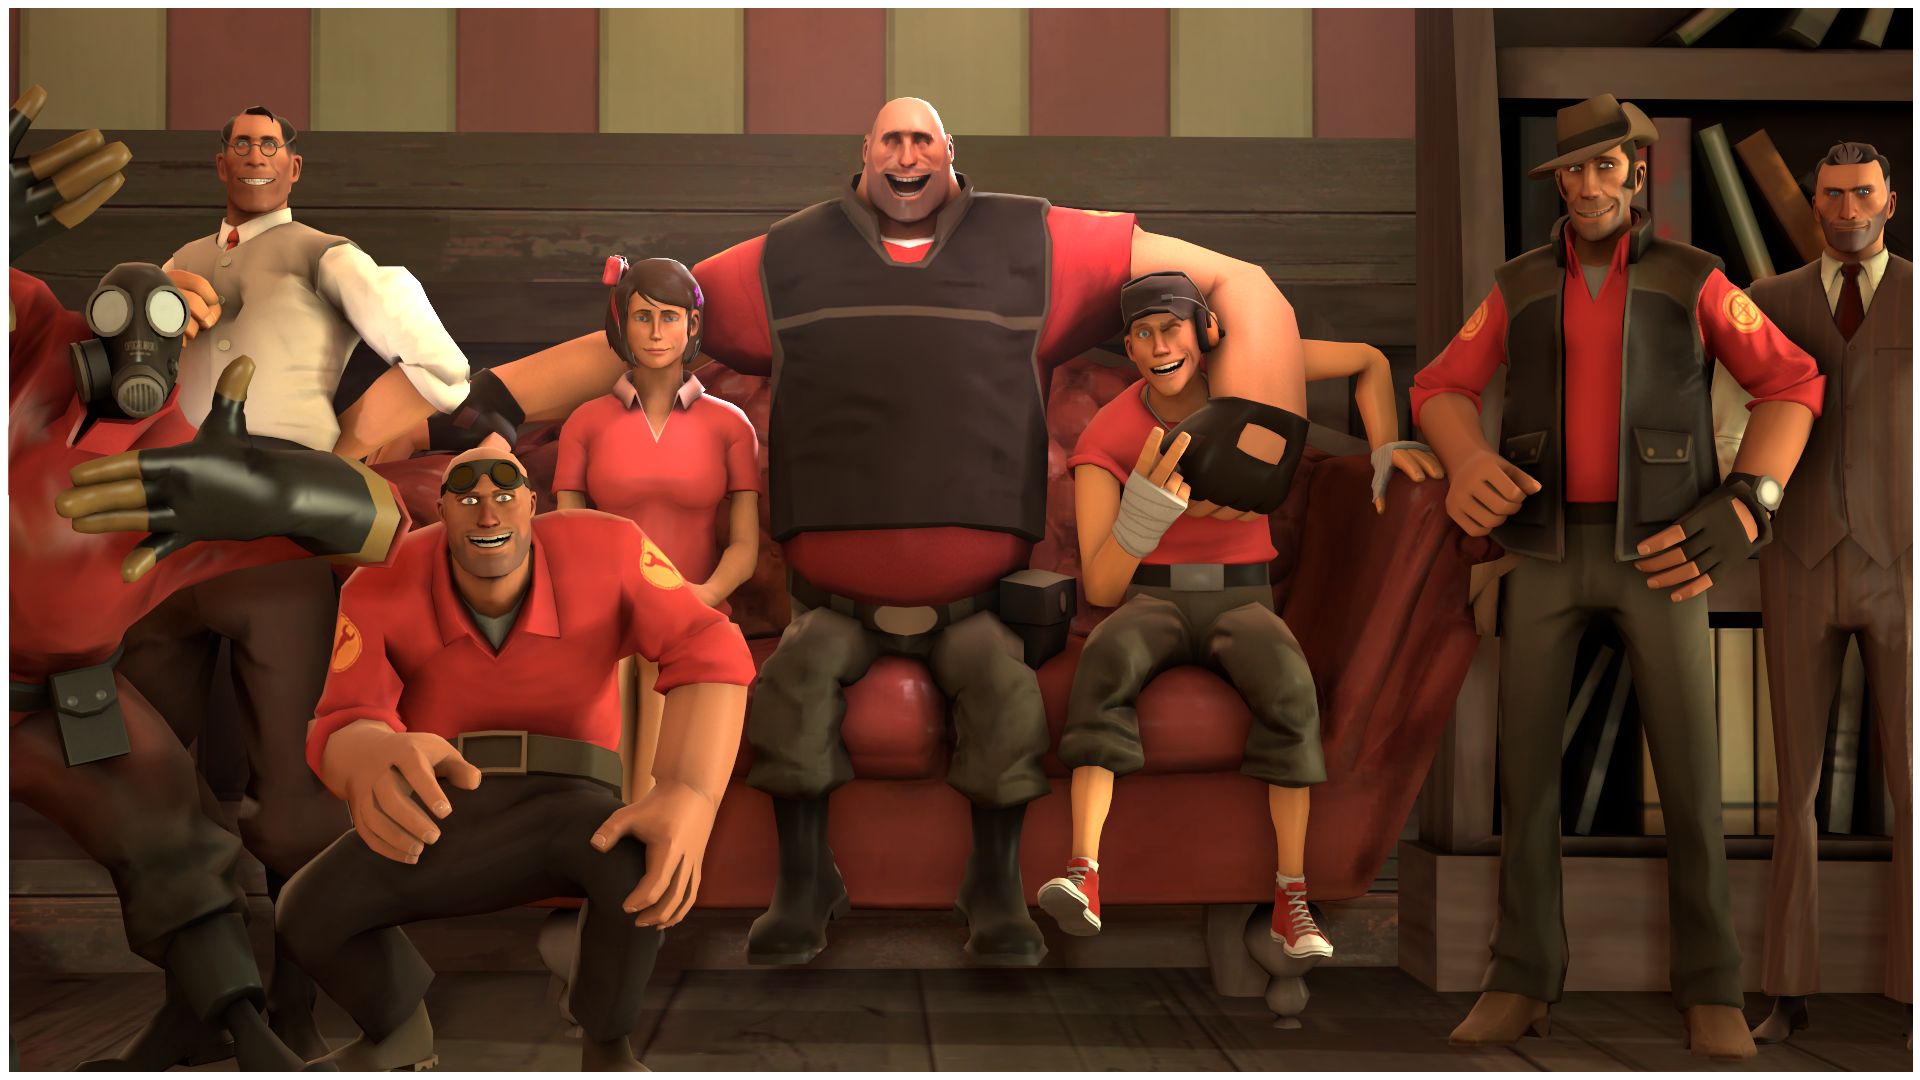 team fortress 2 ps4